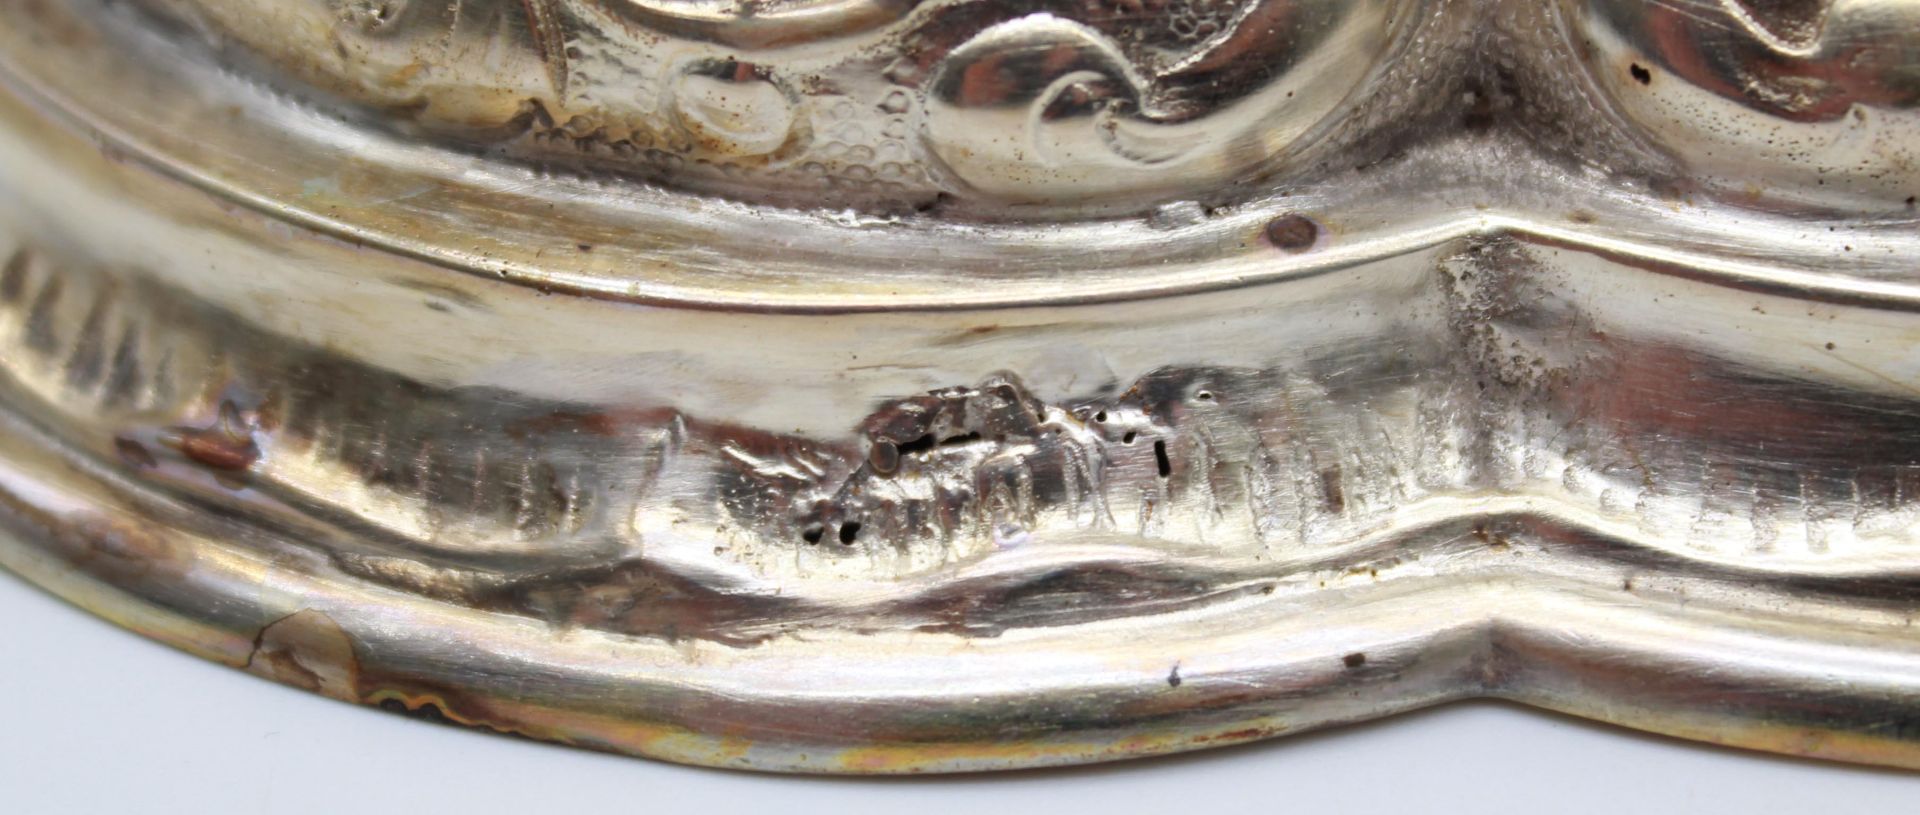 Candlestick, silver 800. 5 flames. Hallmarks. - Image 6 of 15